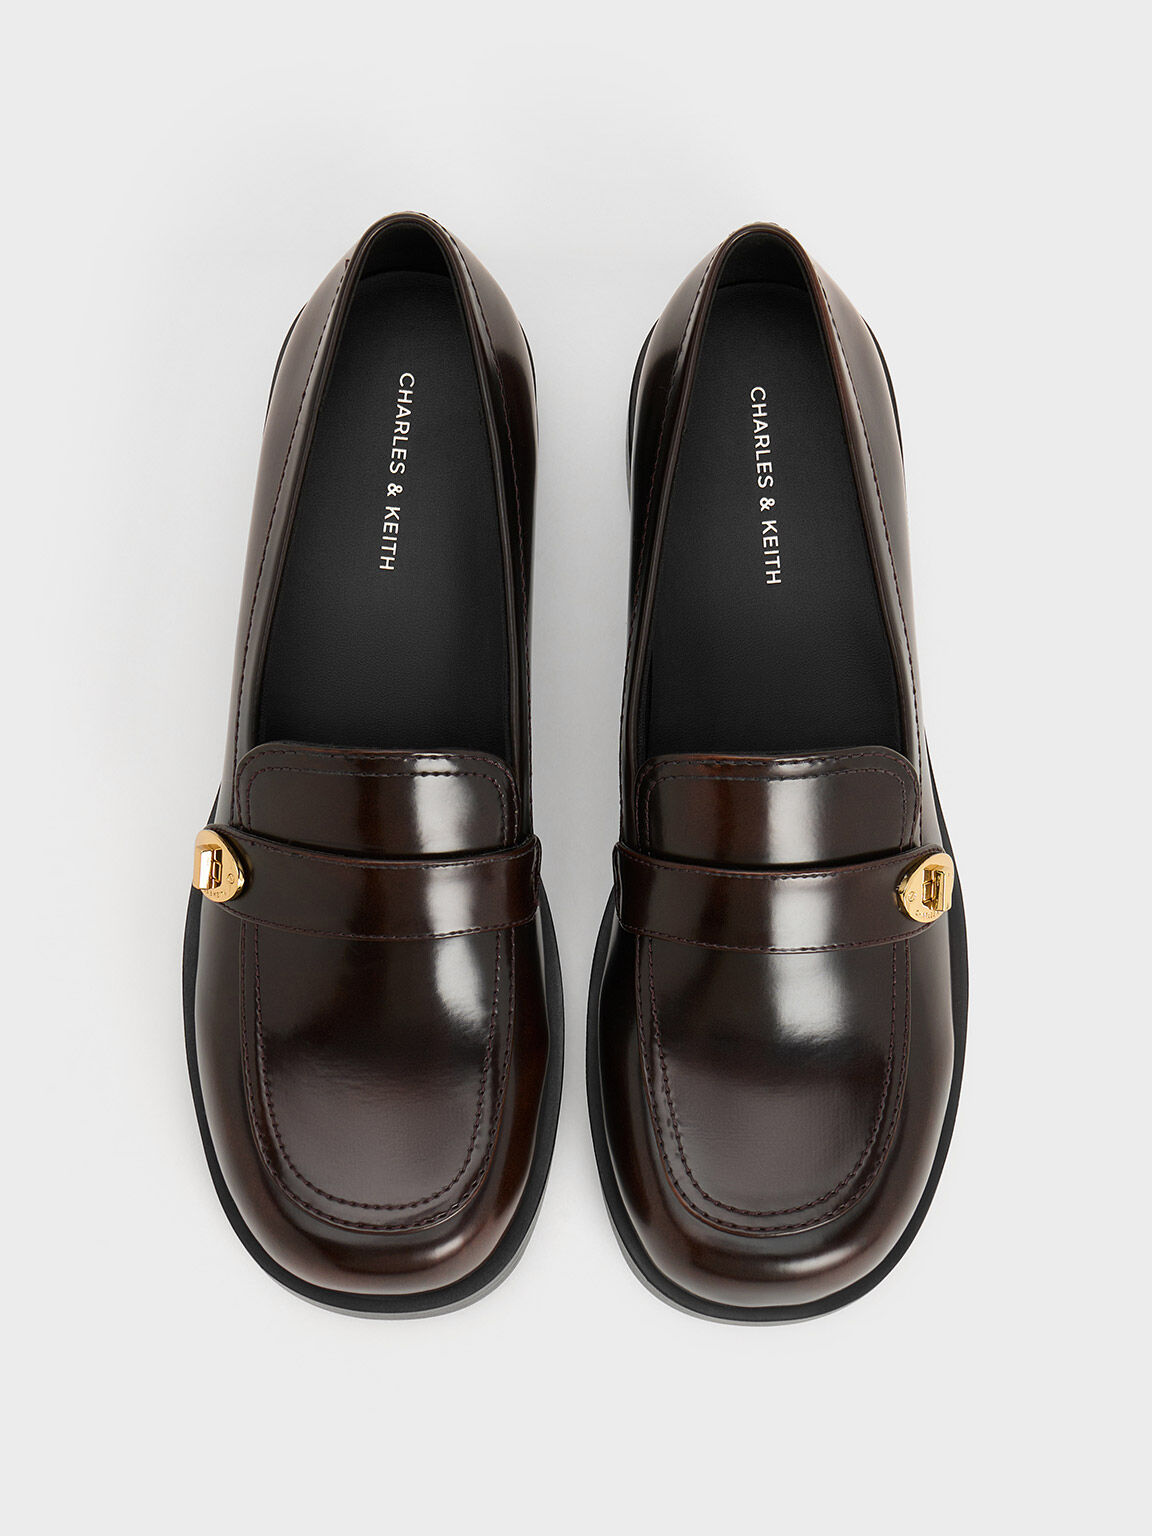 Women's Loafers | Shop Exclusive Styles | CHARLES & KEITH DE